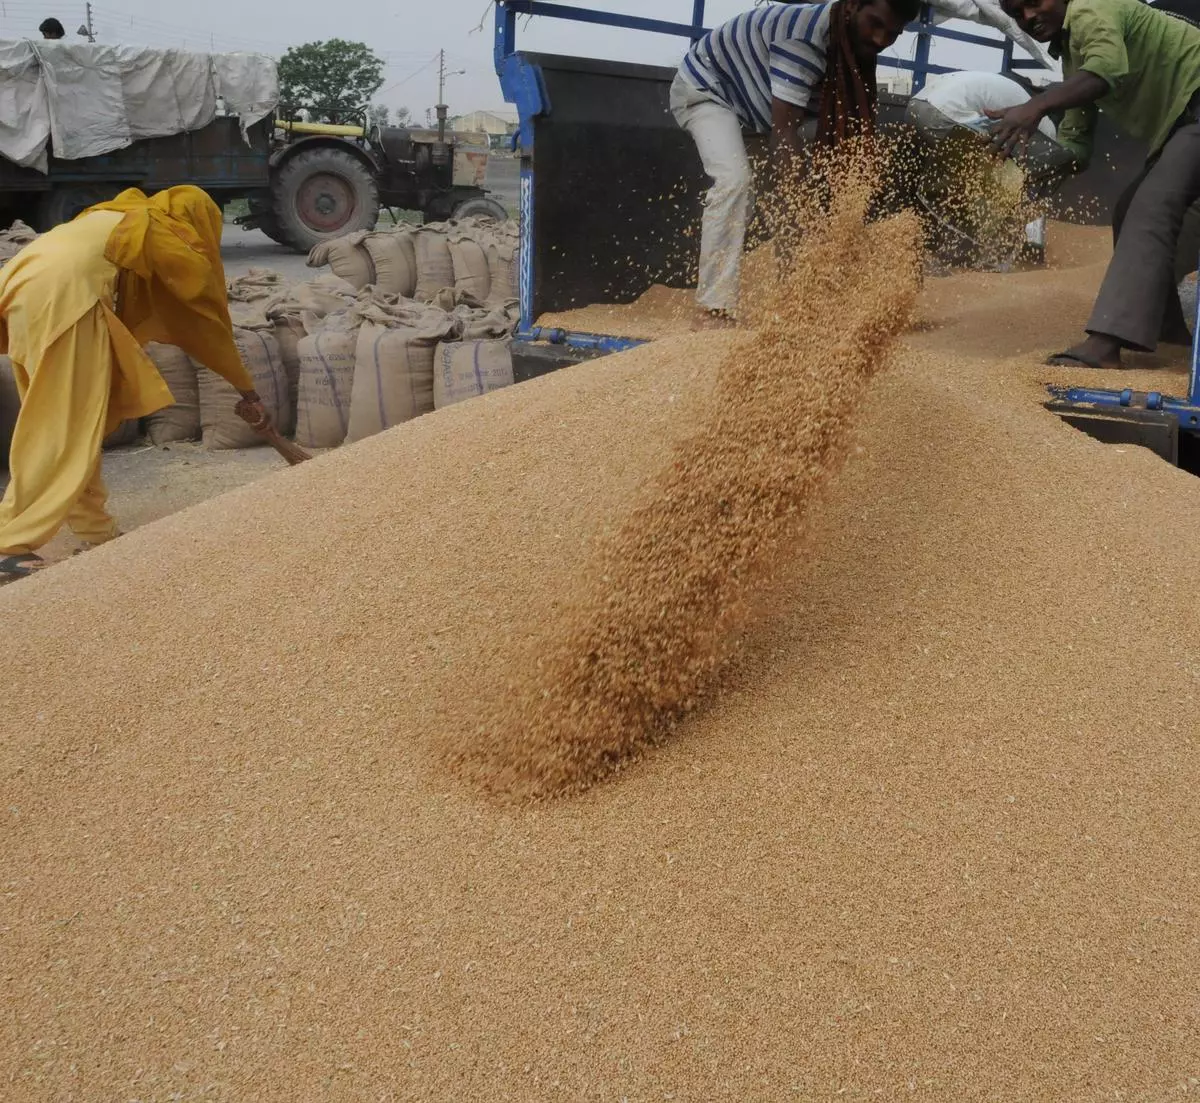 As on July 1, 2022, India’s stock of wheat stood at 28.51 mt against the buffer norm of 27.58 mt